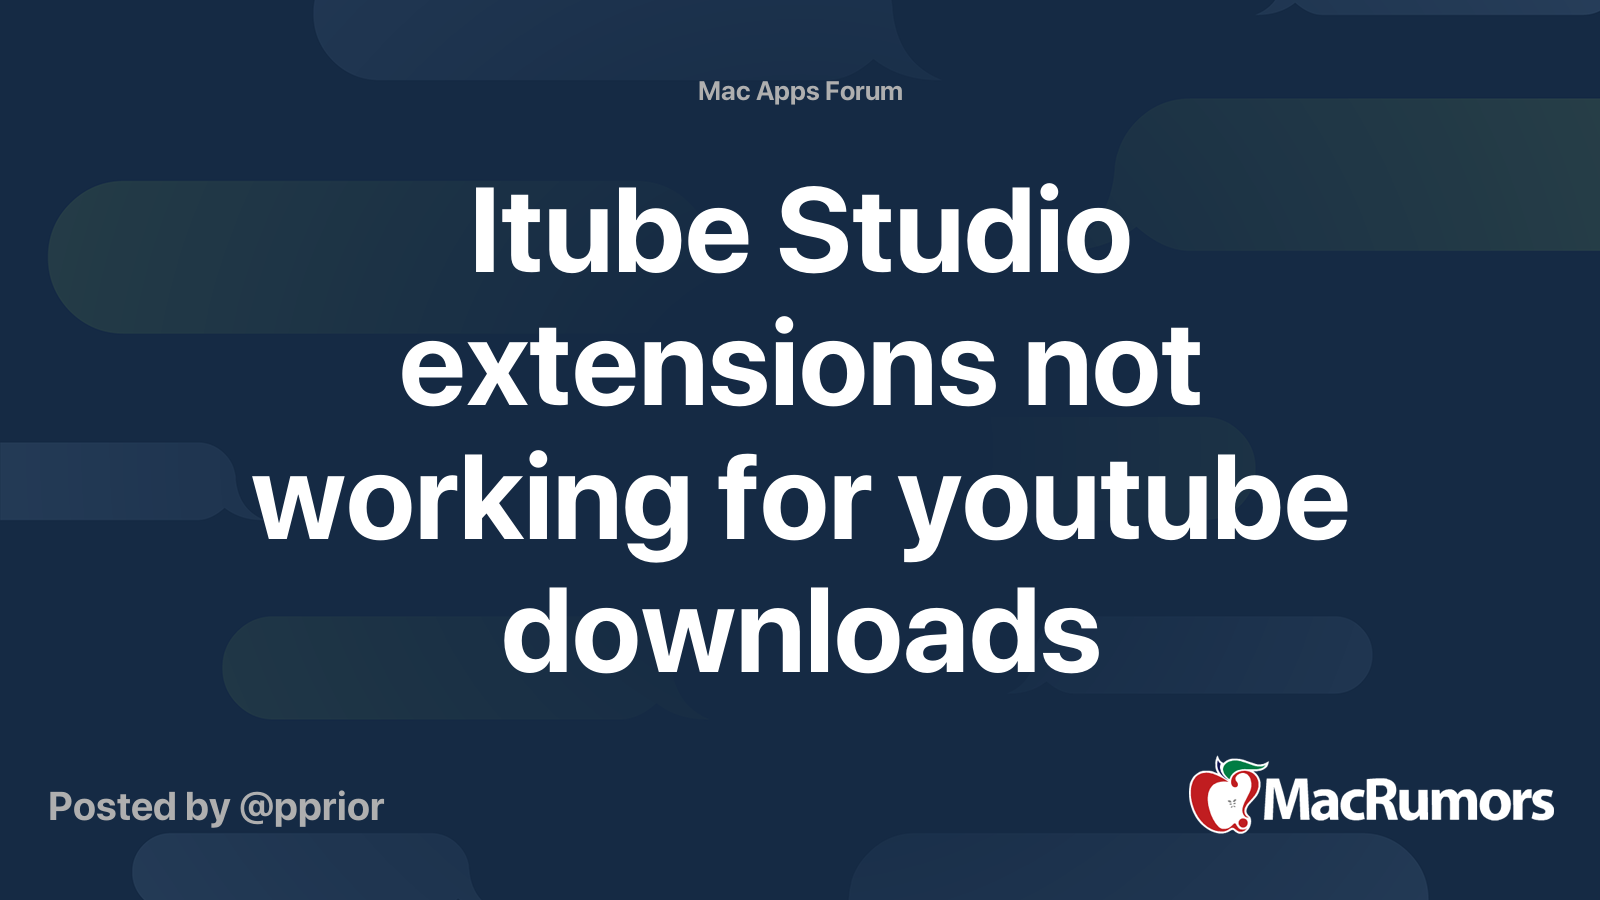 Itube Studio extensions not working for youtube downloads | MacRumors Forums